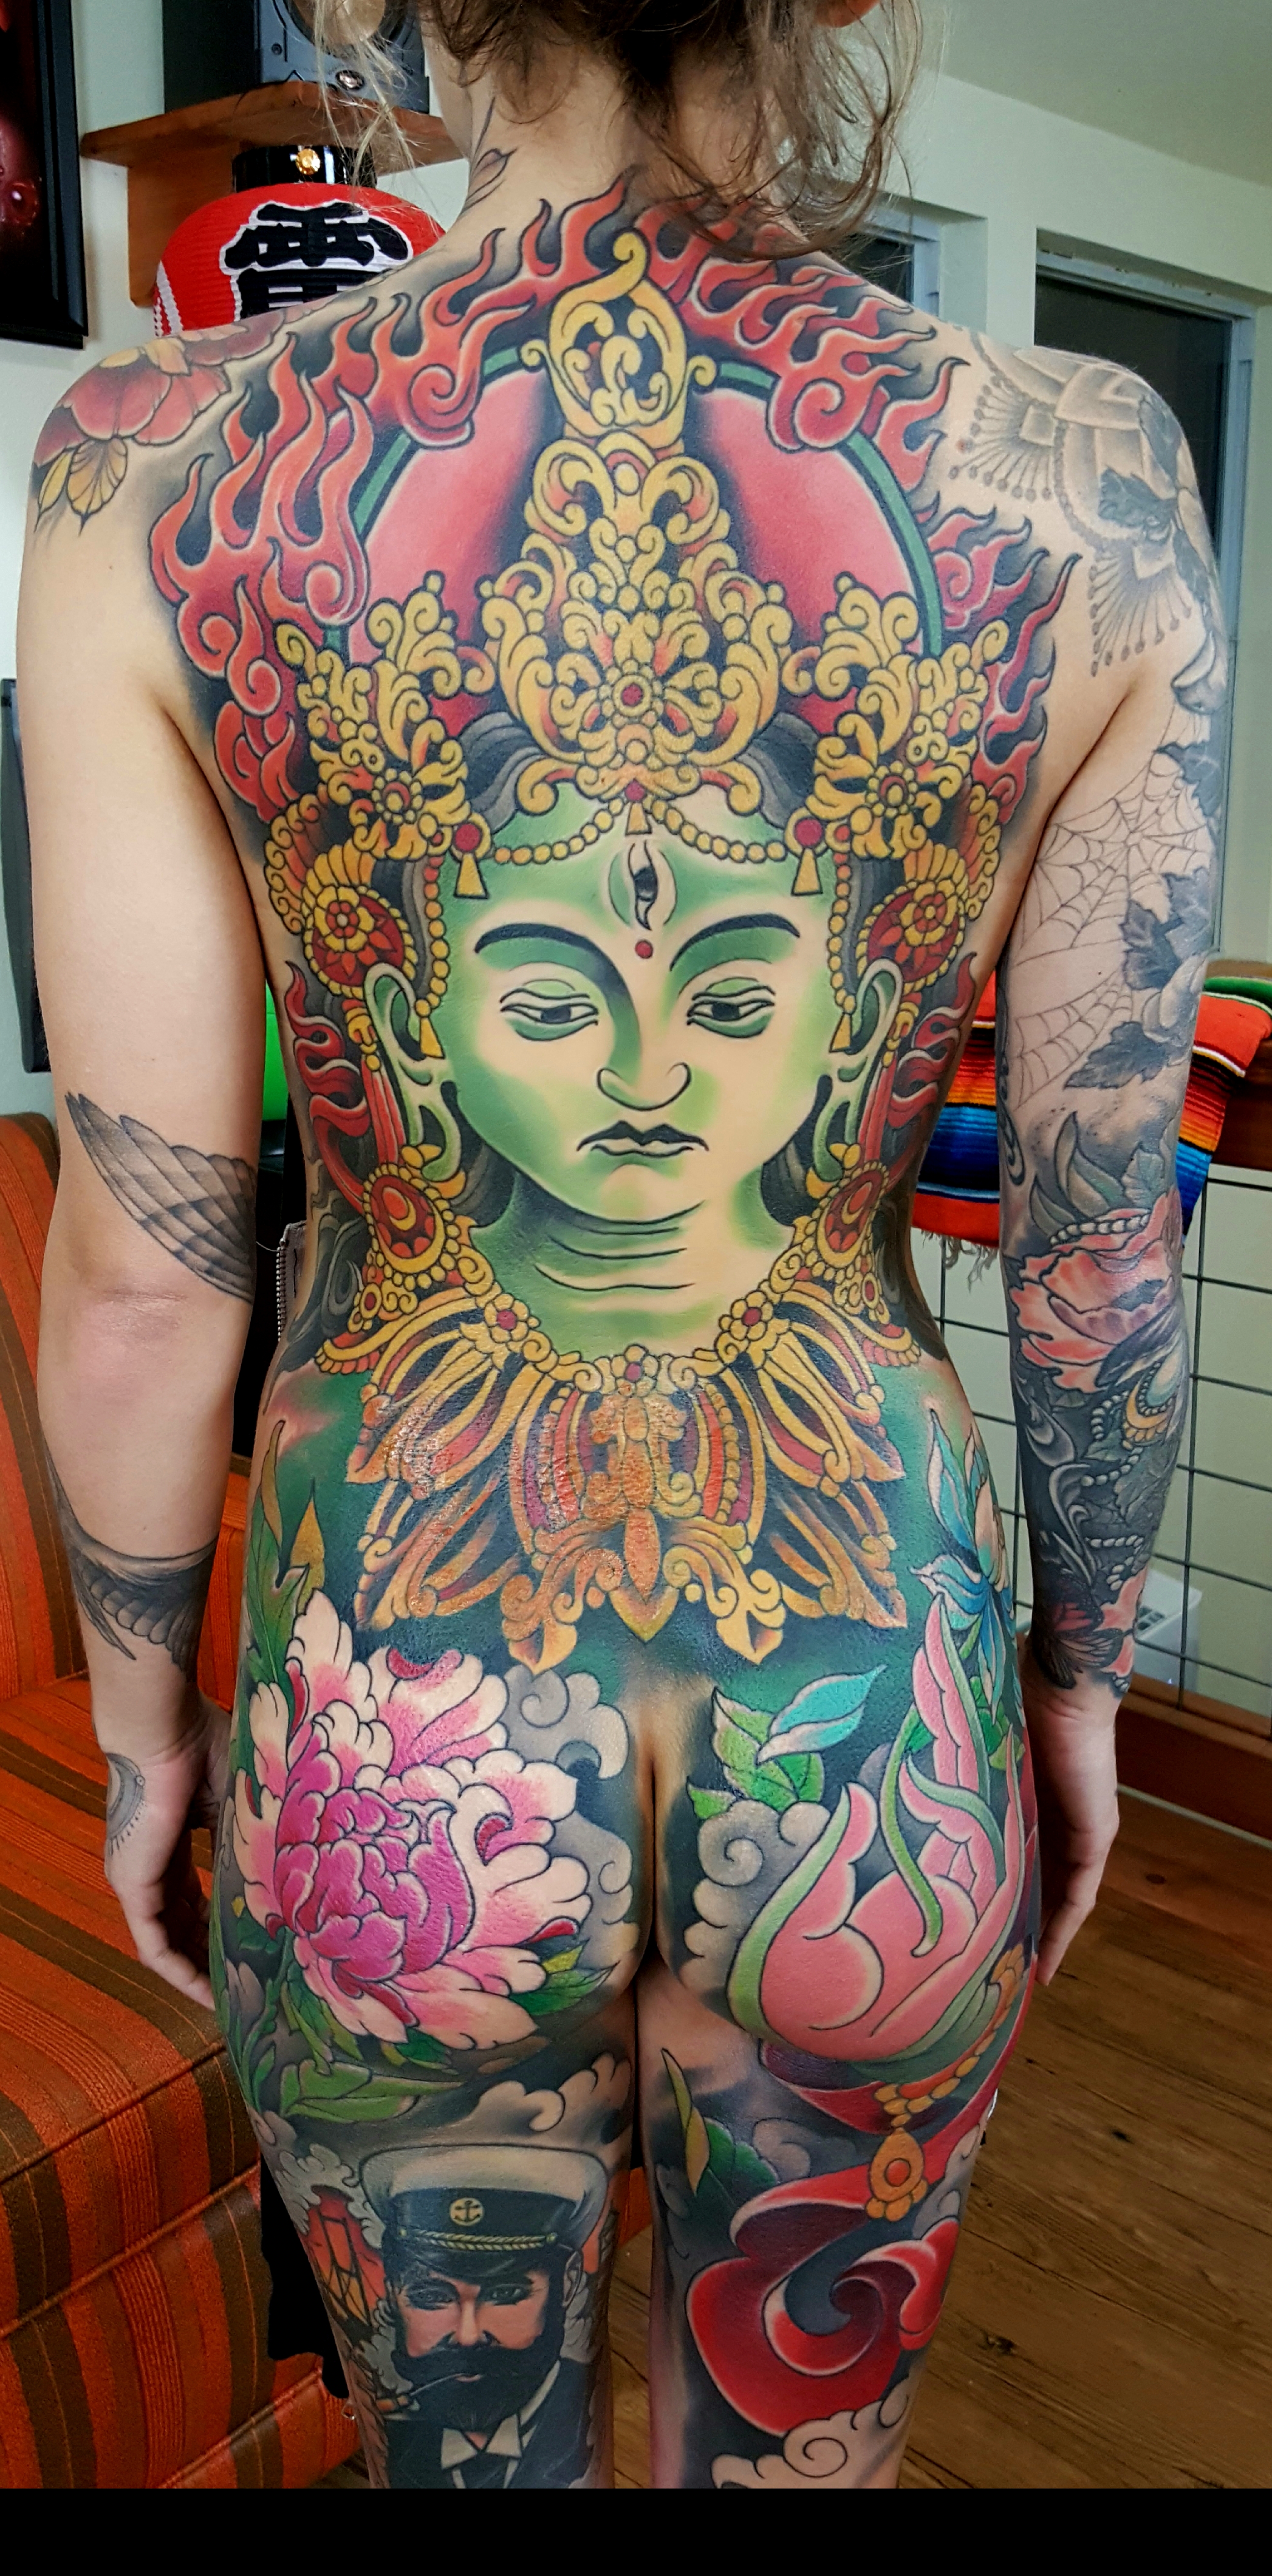 Green Tara coverup enhancement over a 10 year old tattoo by nepcardenas    Instagram